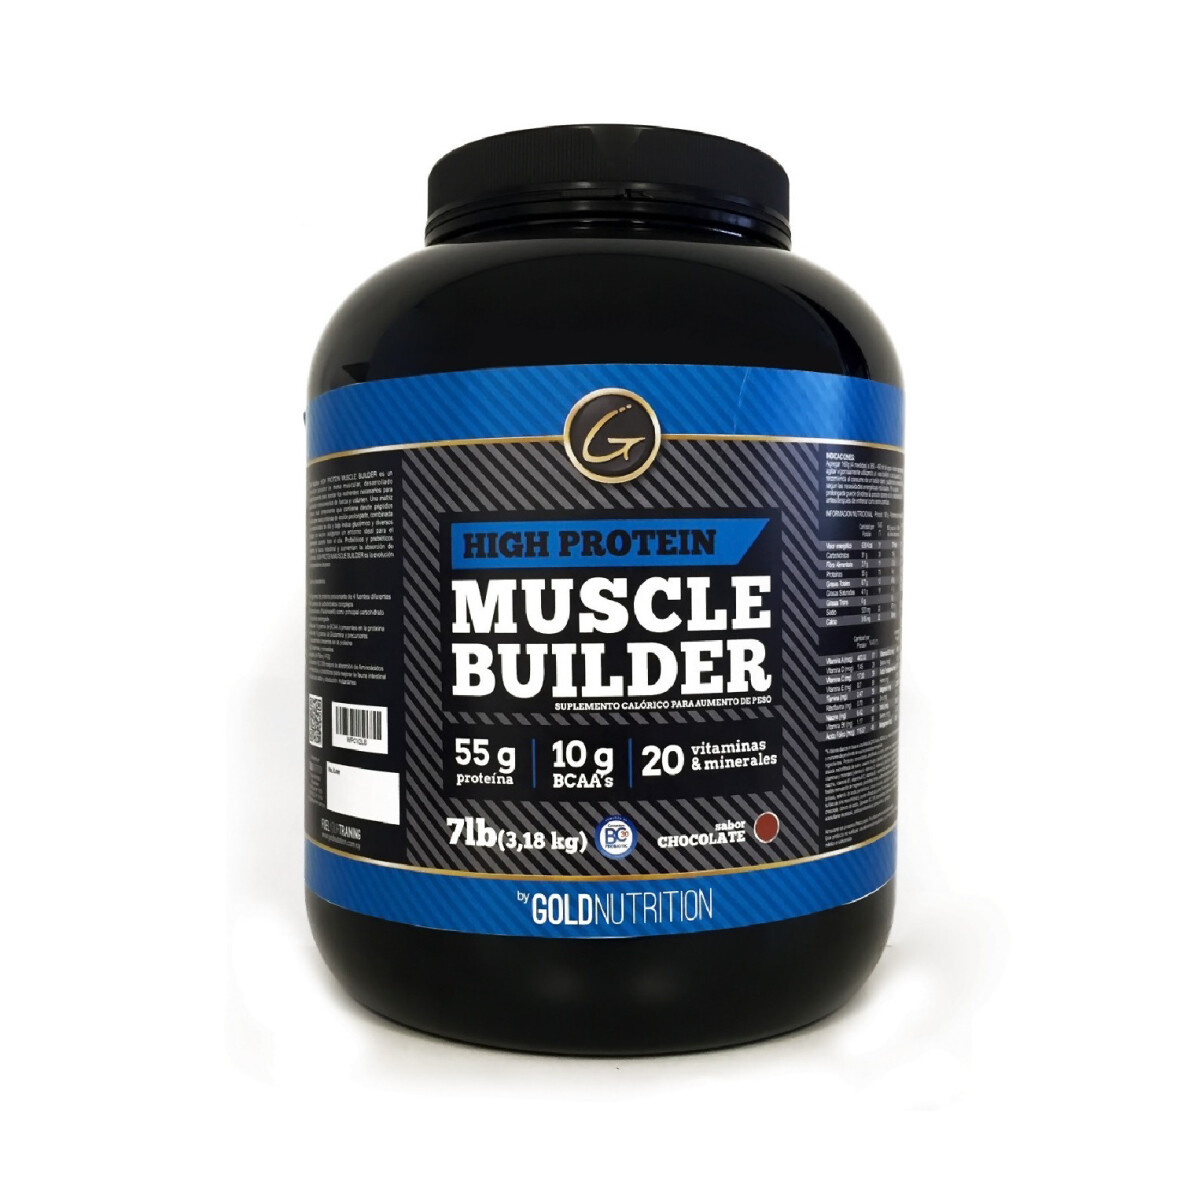 High Protein Muscle Builder Gold Nutrition Chocolate 7 Lbs. 